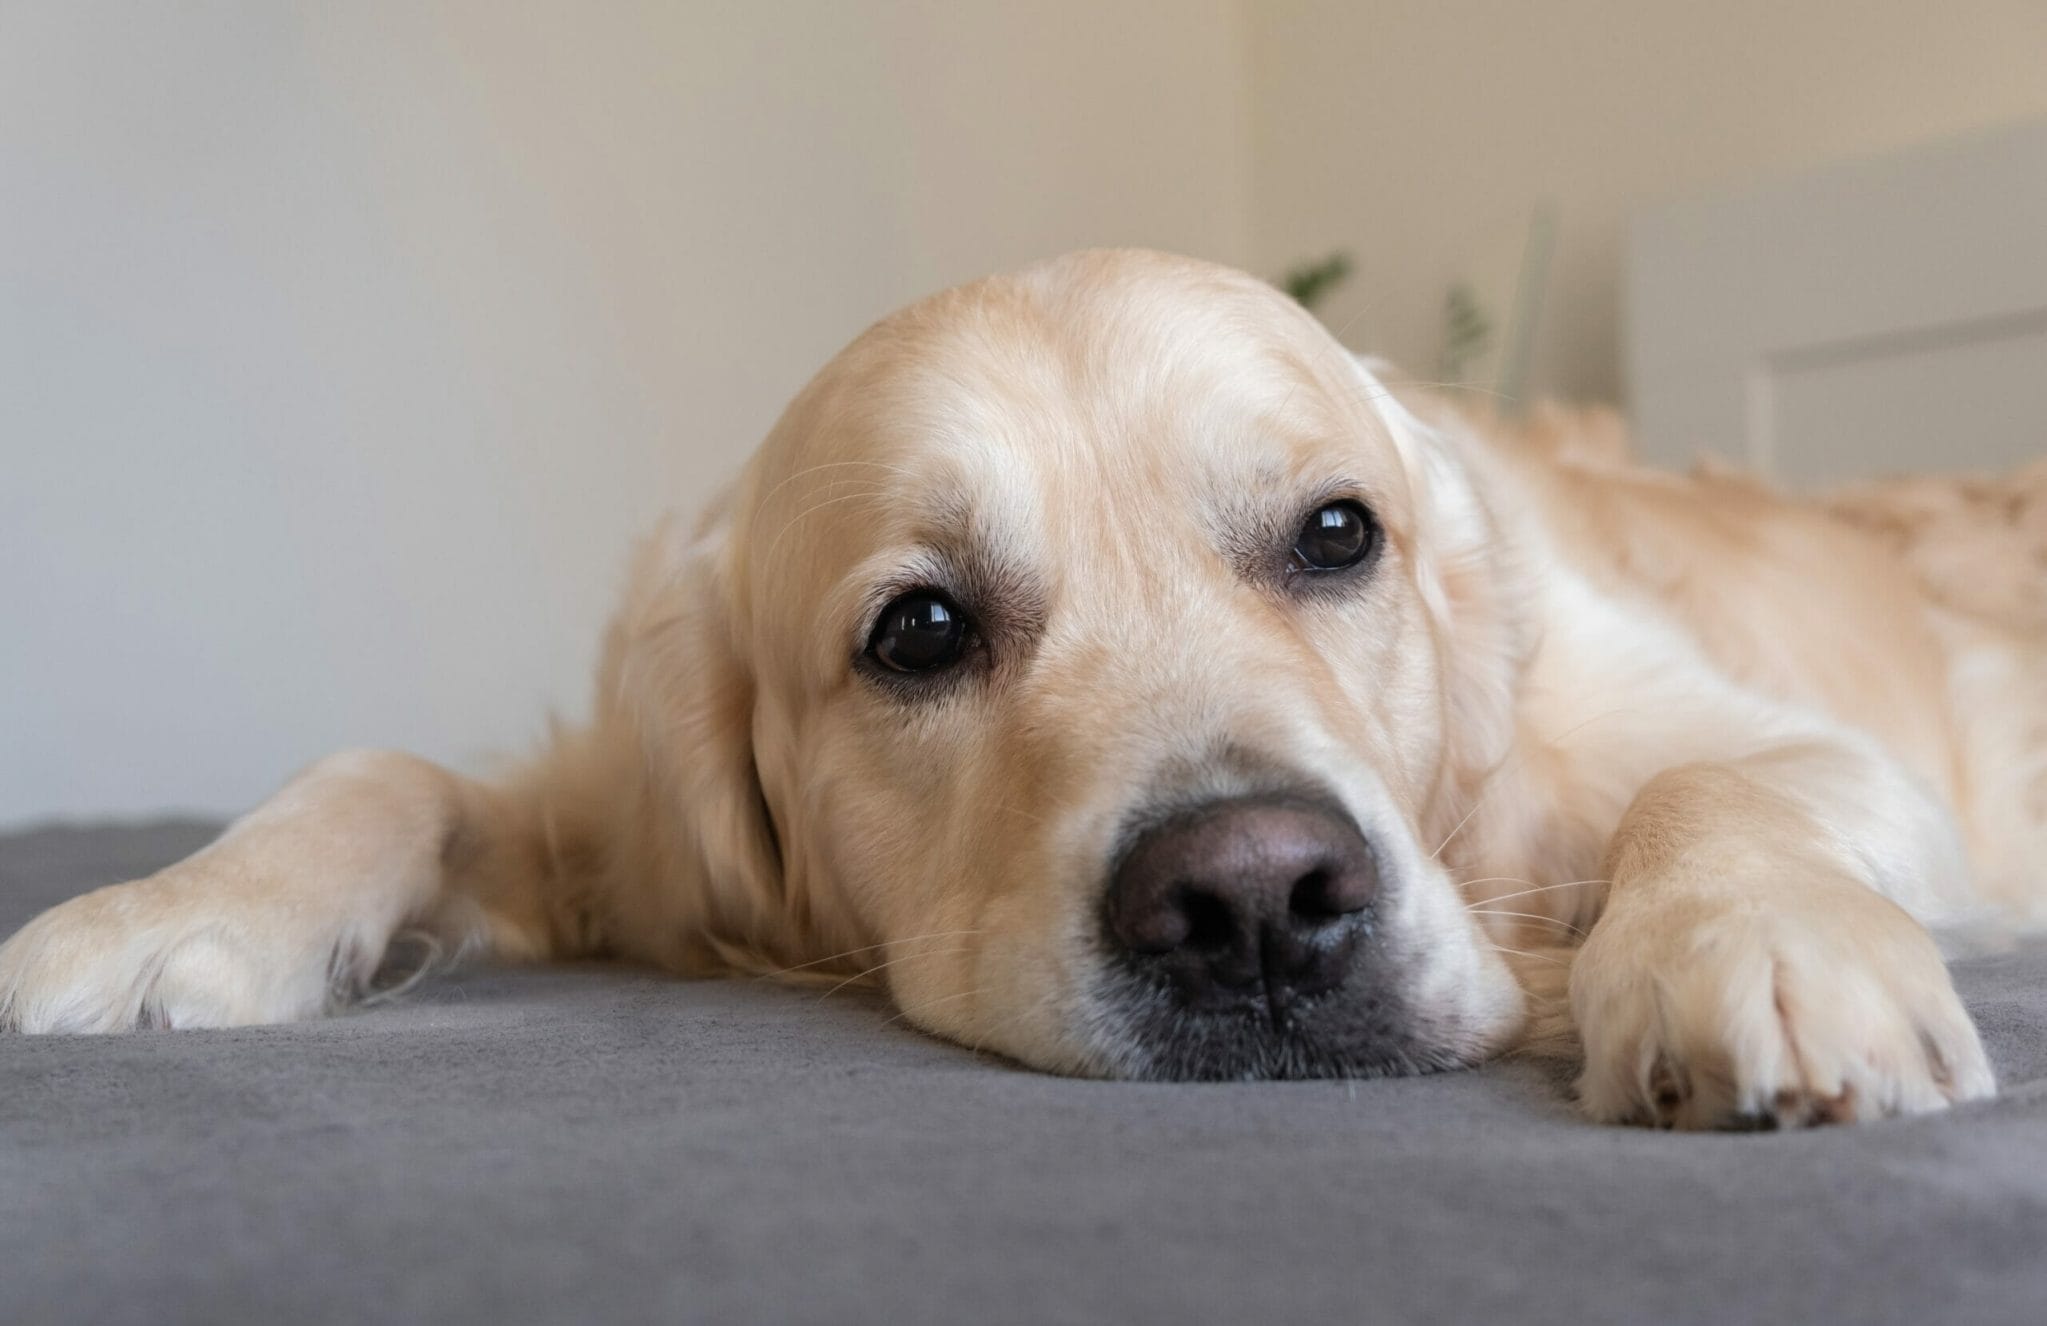 Can my dog sleep in my bed after flea treatment?